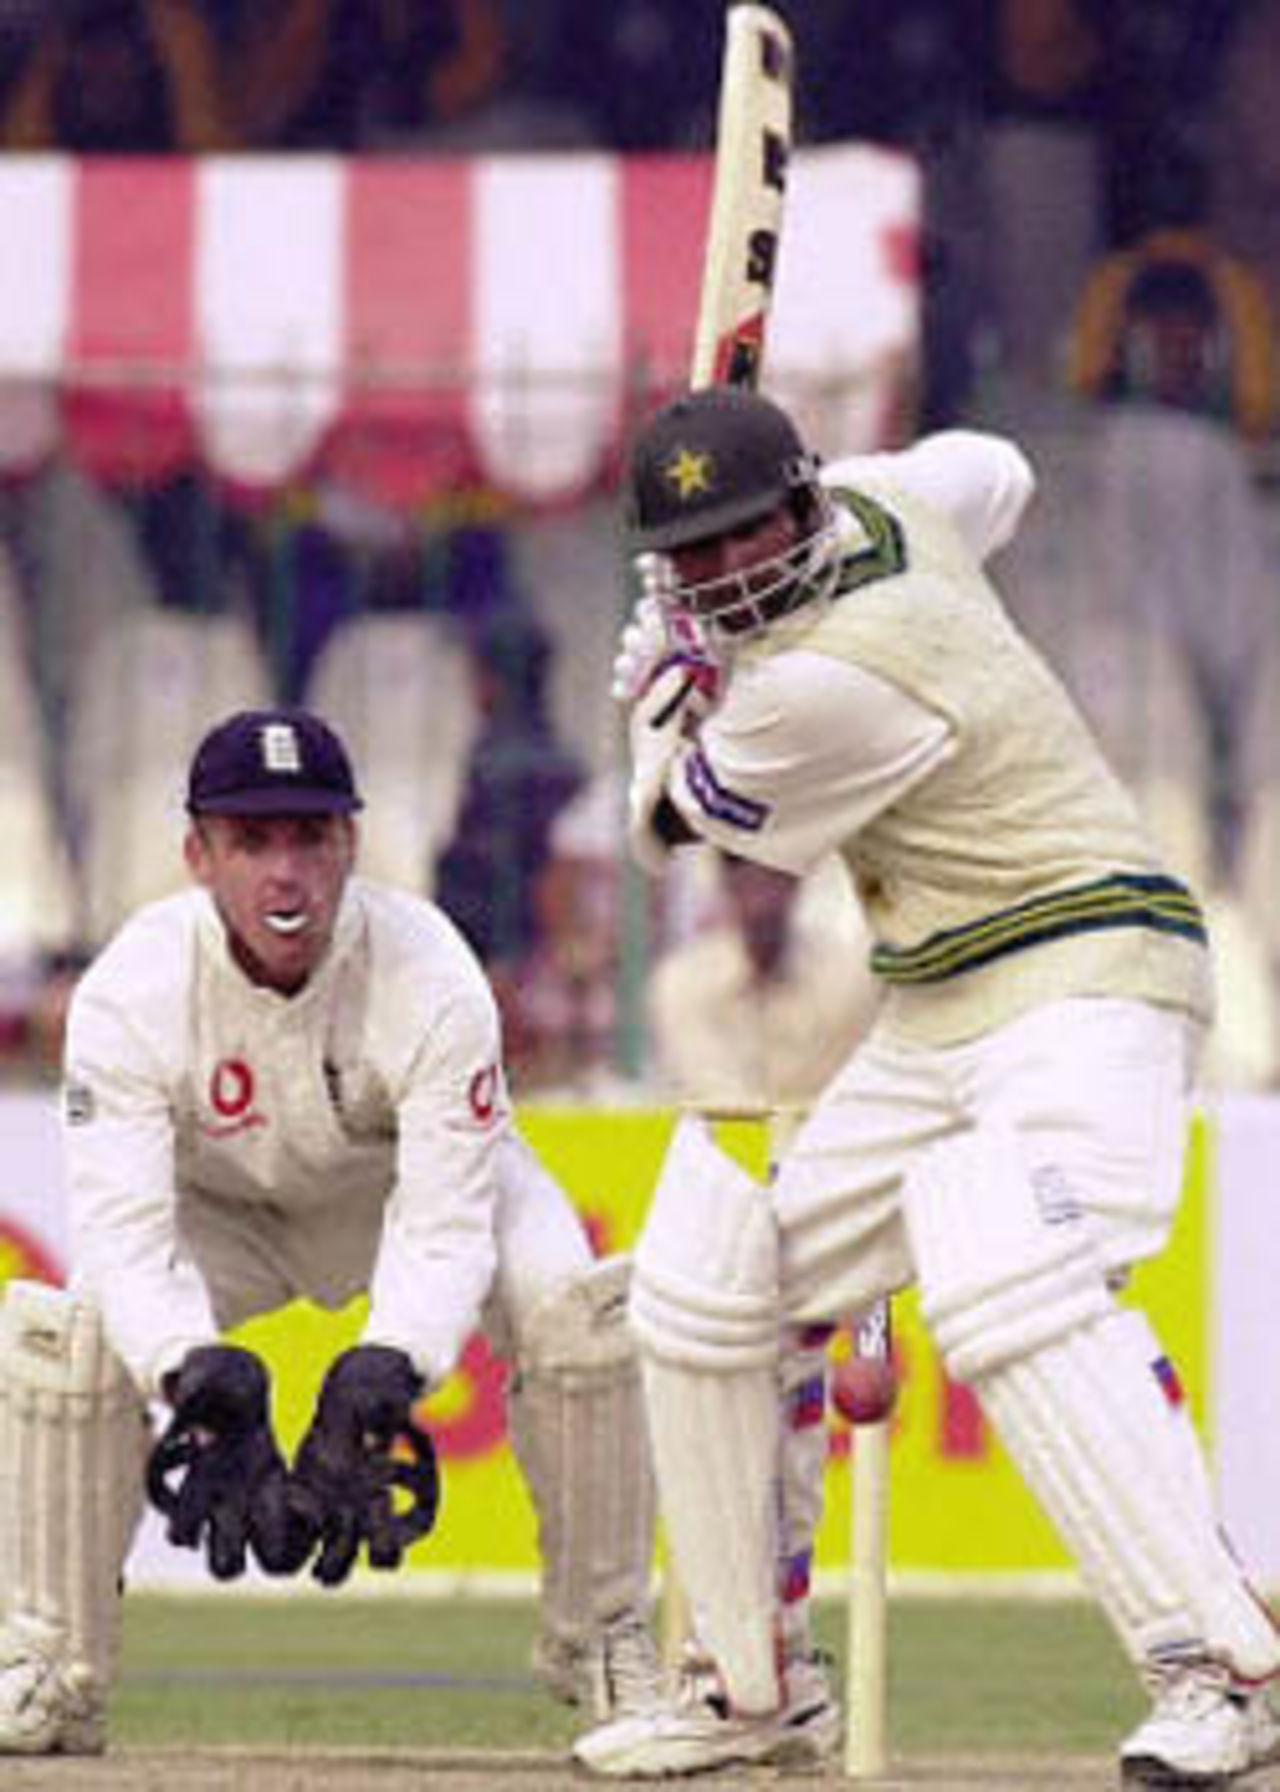 Yousuf Youhana positions himself to drive the ball, England in Pakistan, 2000/01, 1st Test, Pakistan v England, Gaddafi Stadium, Lahore, 15-19 November 2000 (Day 4).